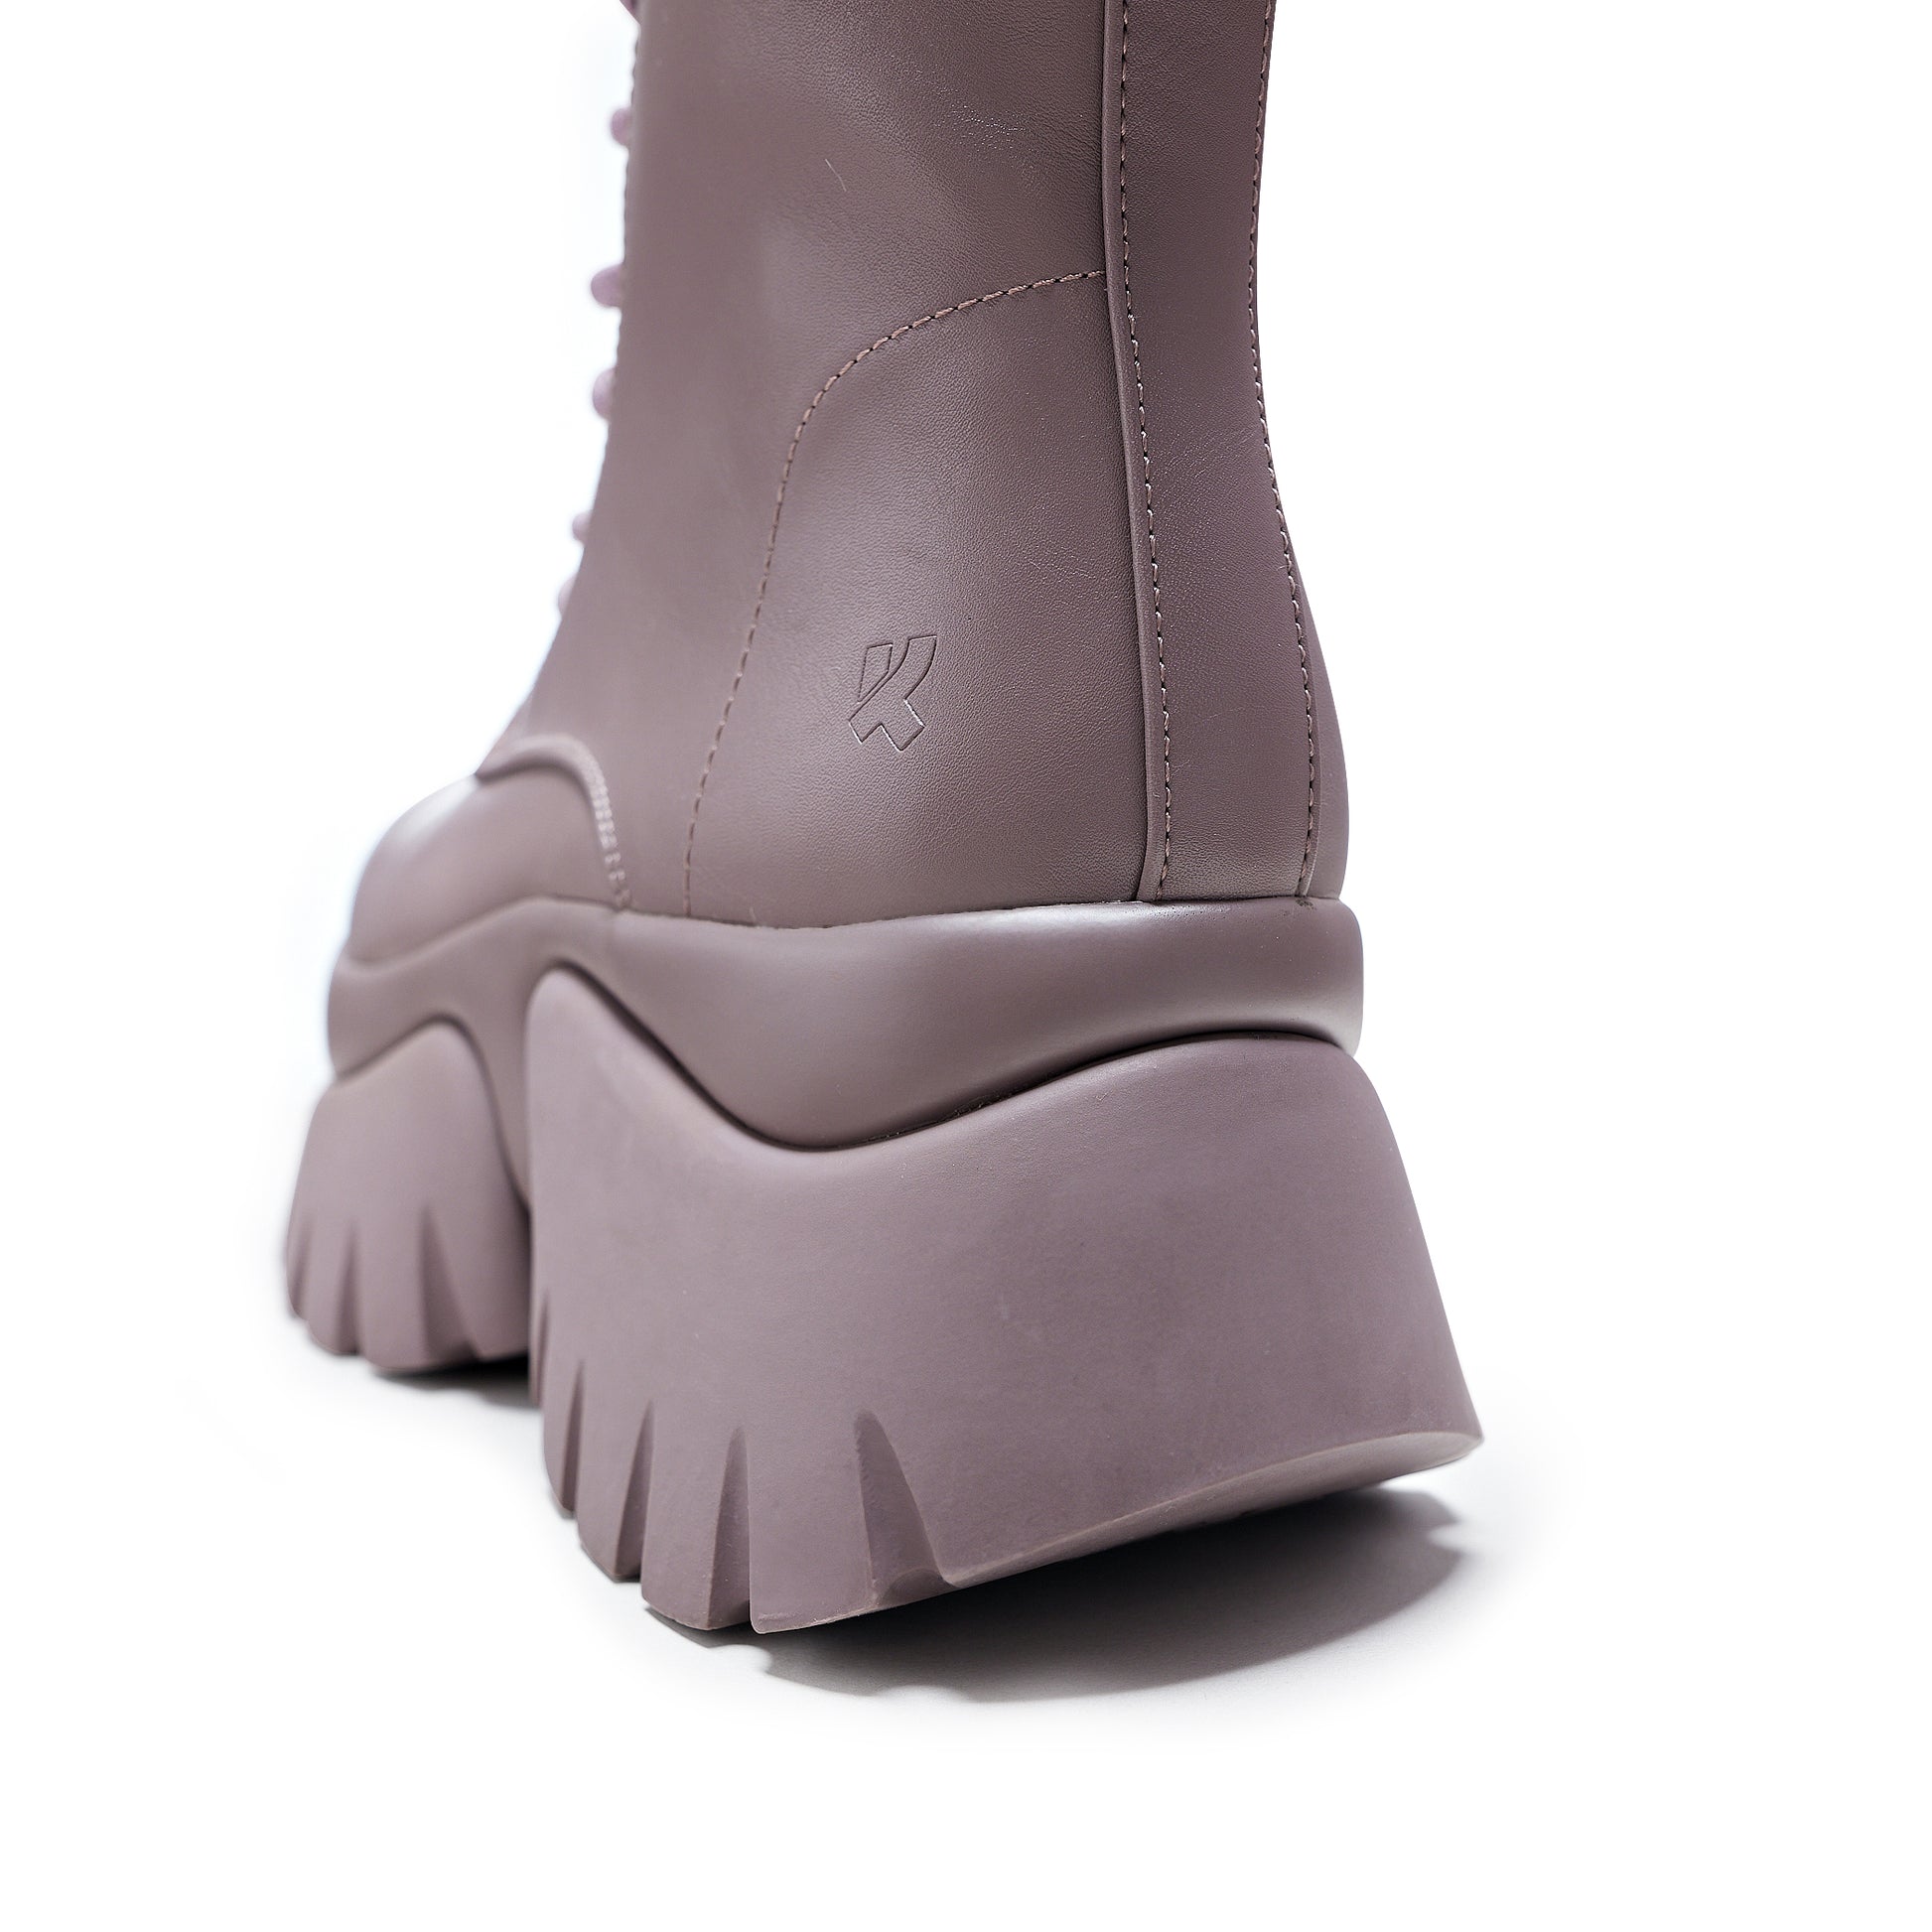 Costal Cruiser Vilun Ankle Boots - Mauve - Ankle Boots - KOI Footwear - Purple - Back View Detail